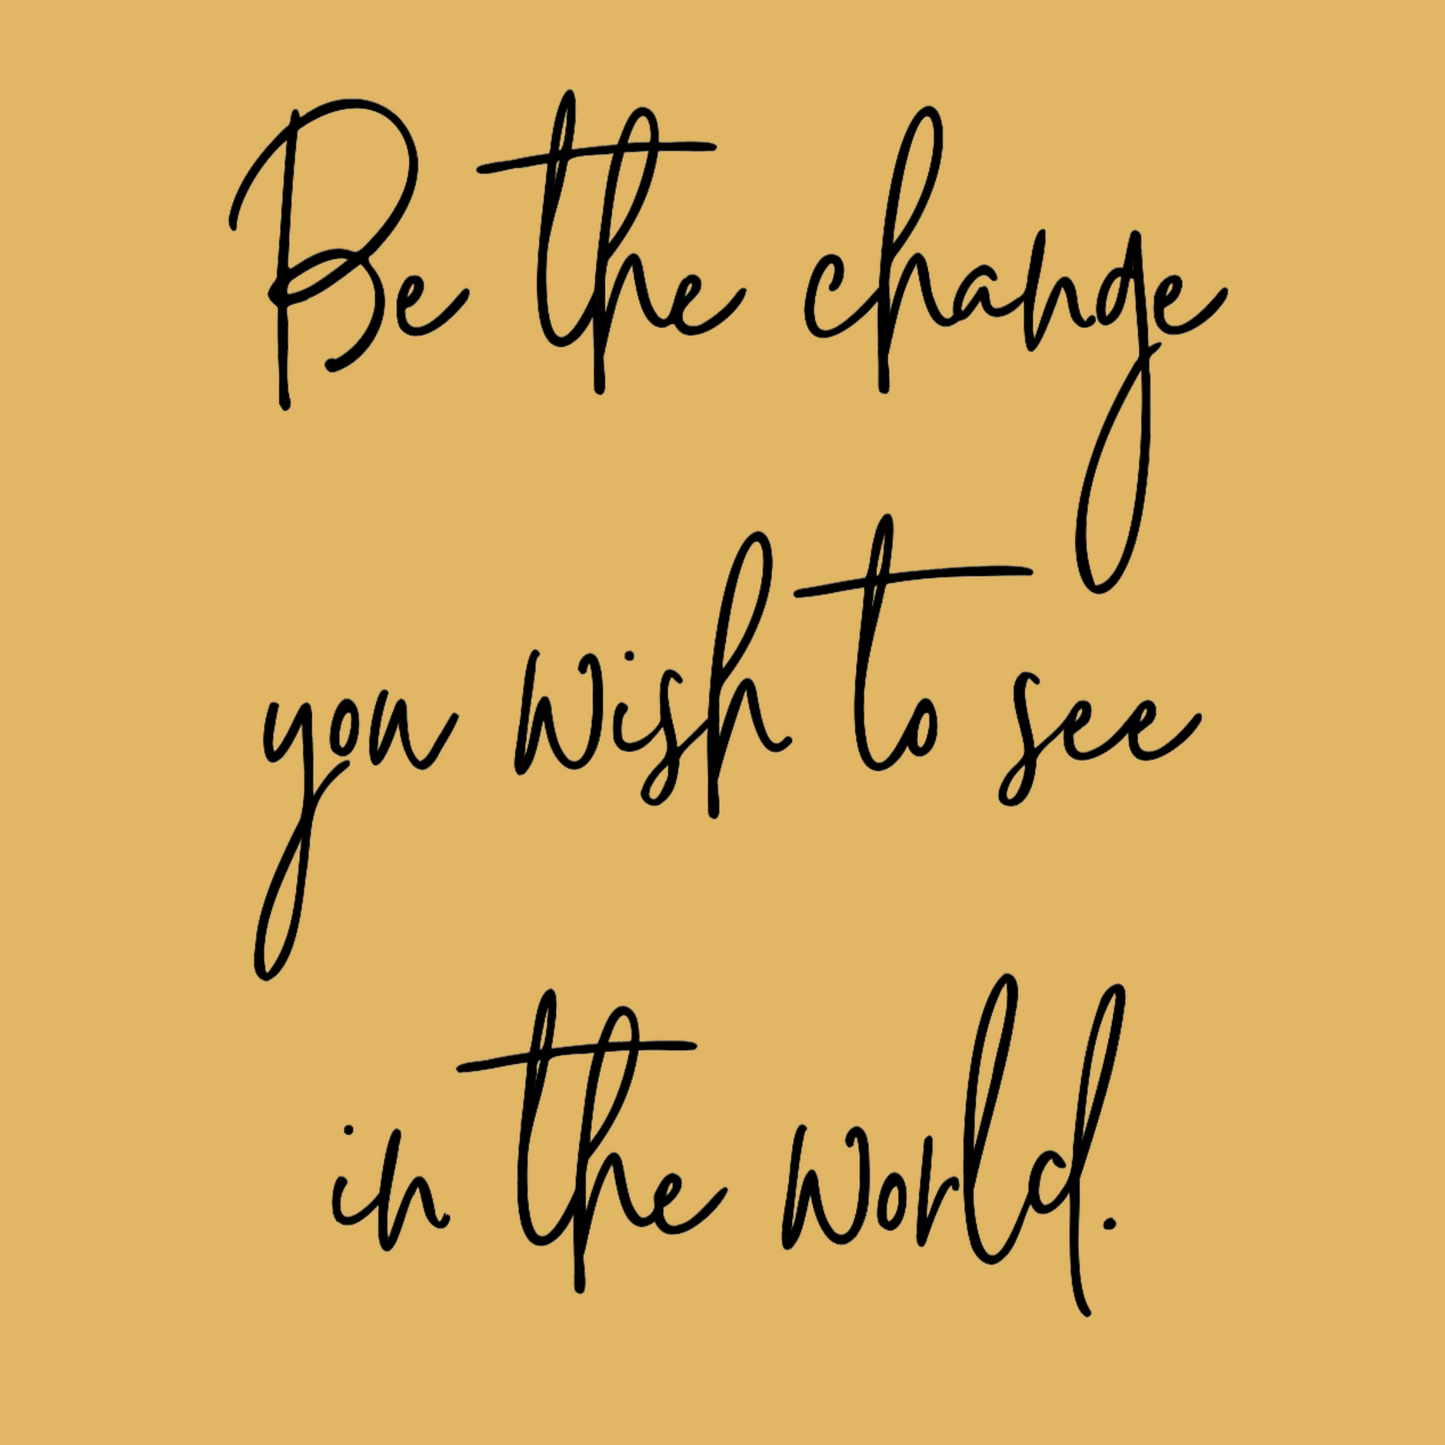 Be The Change Hooded Sweatshirt in a light yellow. The back has a black cursive writing saying "be the change you wish to see in the world." The front has a small flower with stem in black - pocket style. This is the back design in black on a light yellow background. Close up view of the design.